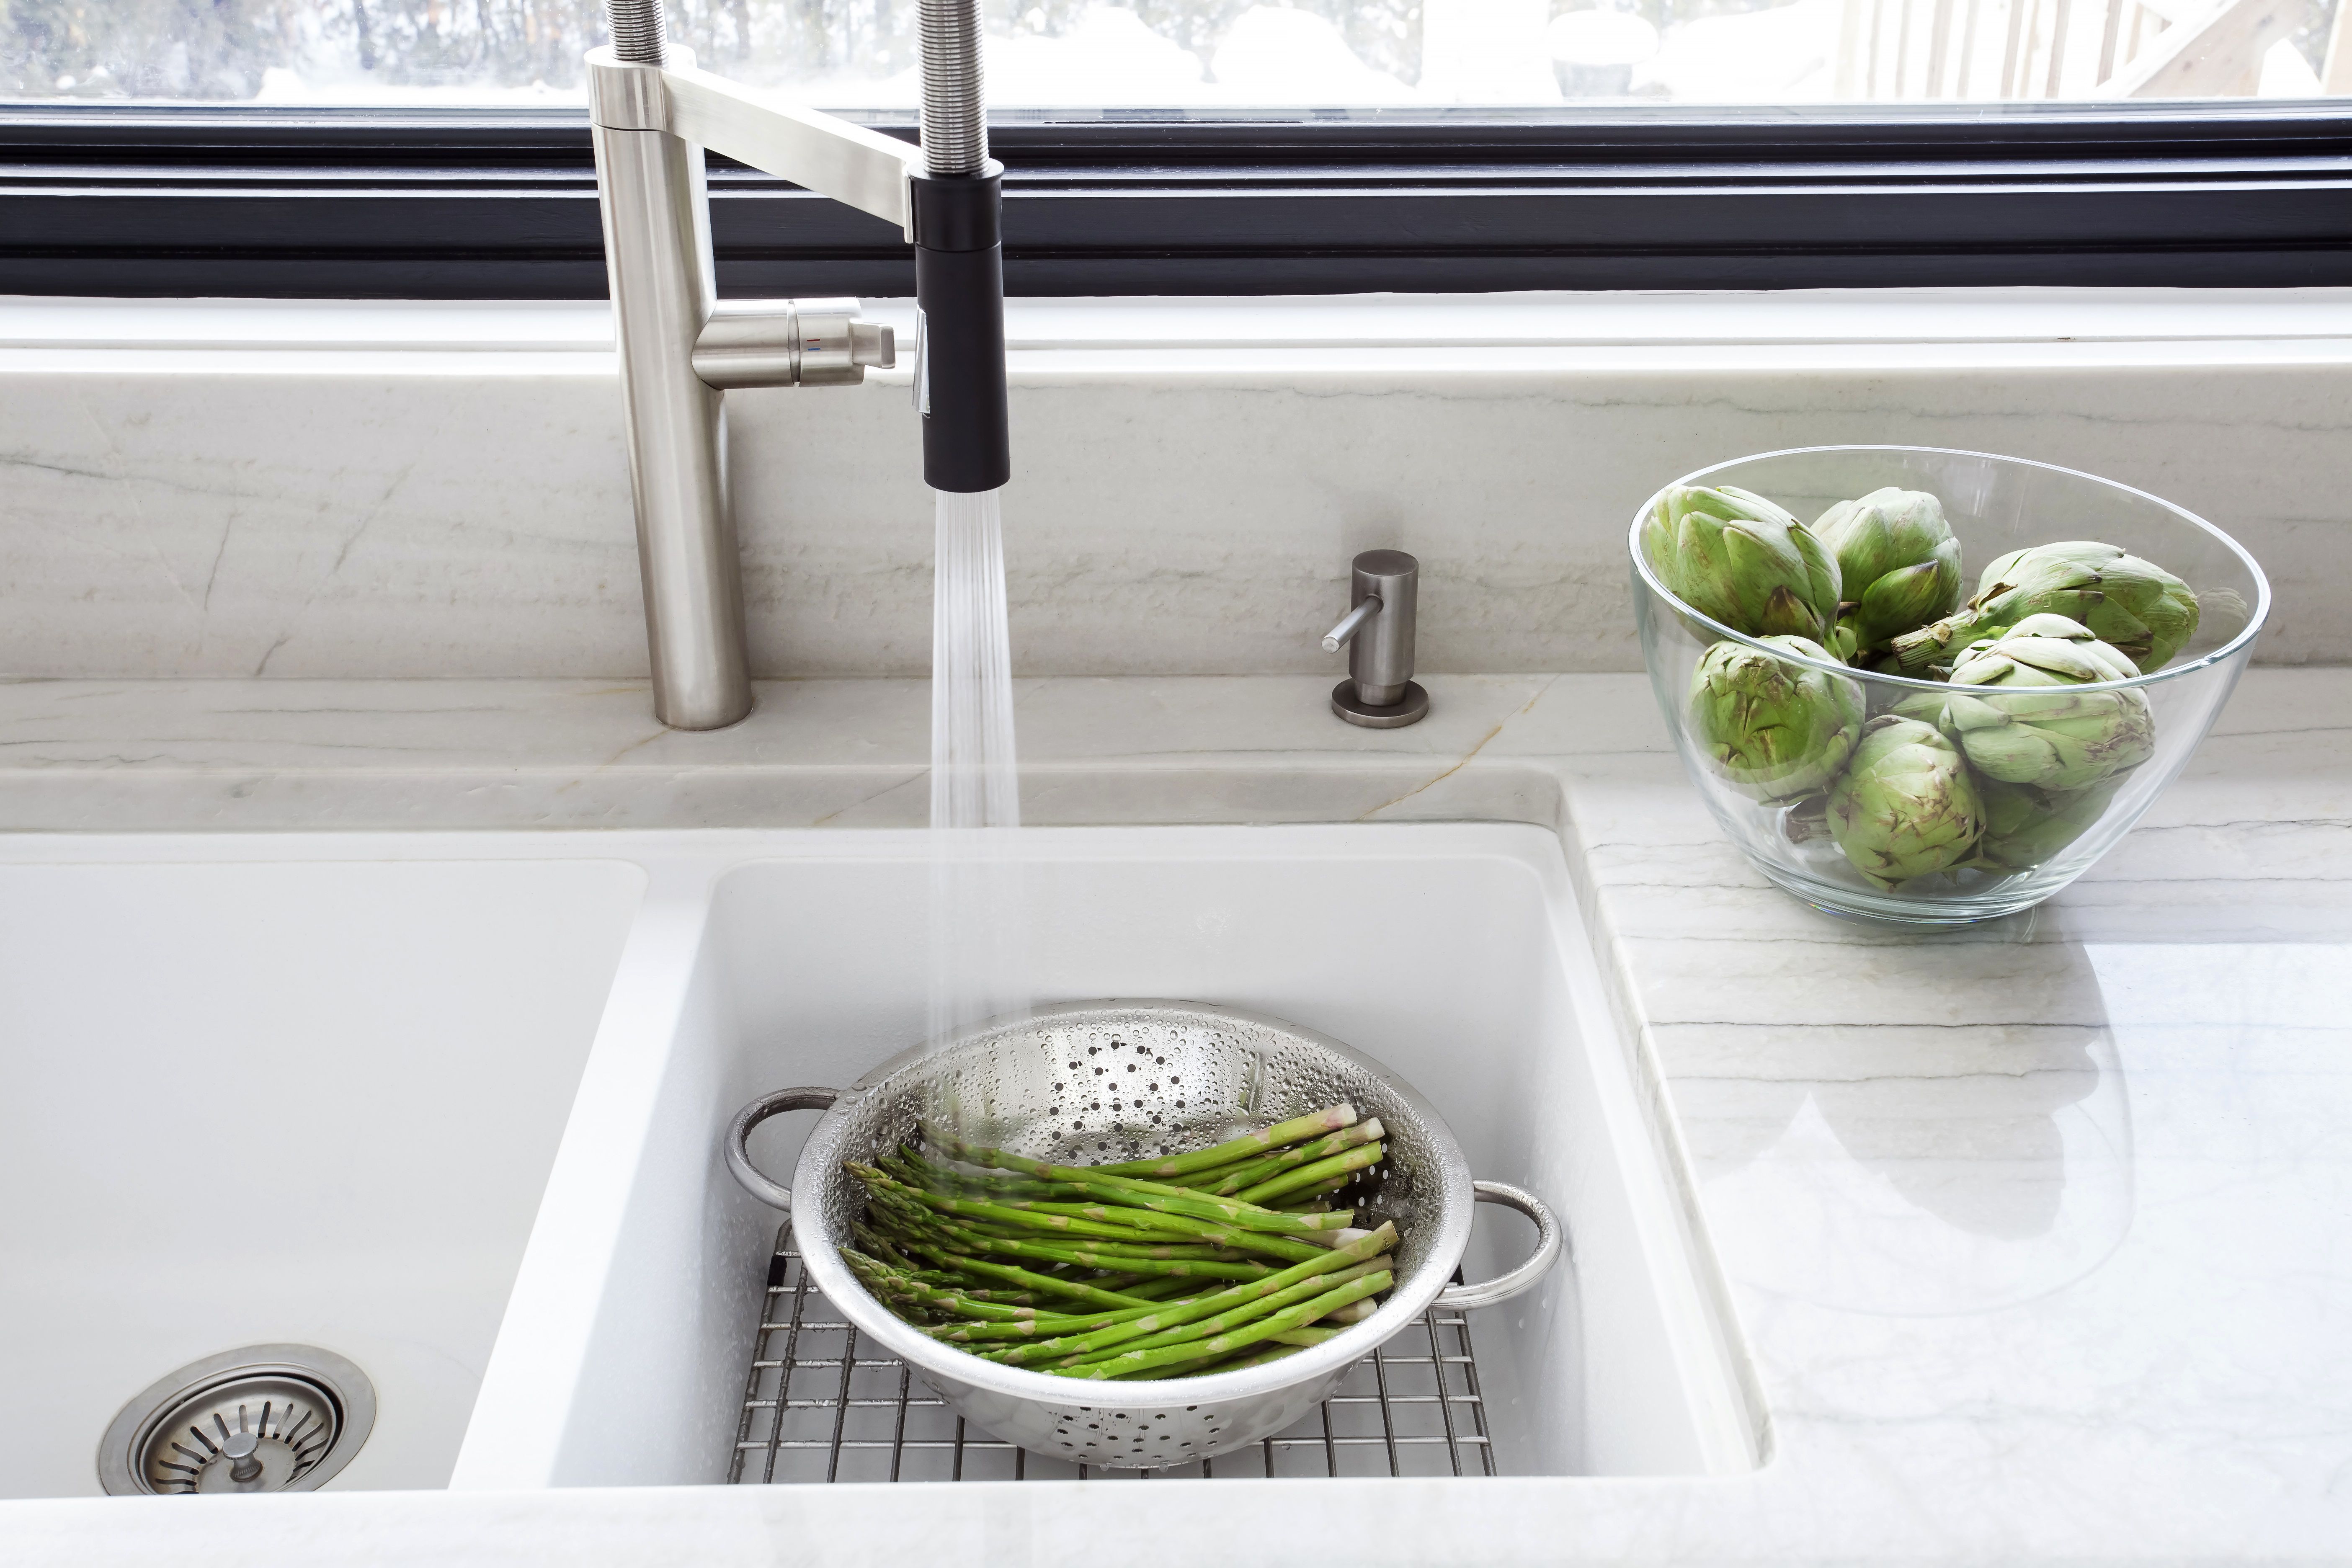 Washing Fresh Asparagus In The Kitchen Sink  518962978 5a960501ae9ab8003749ee74 